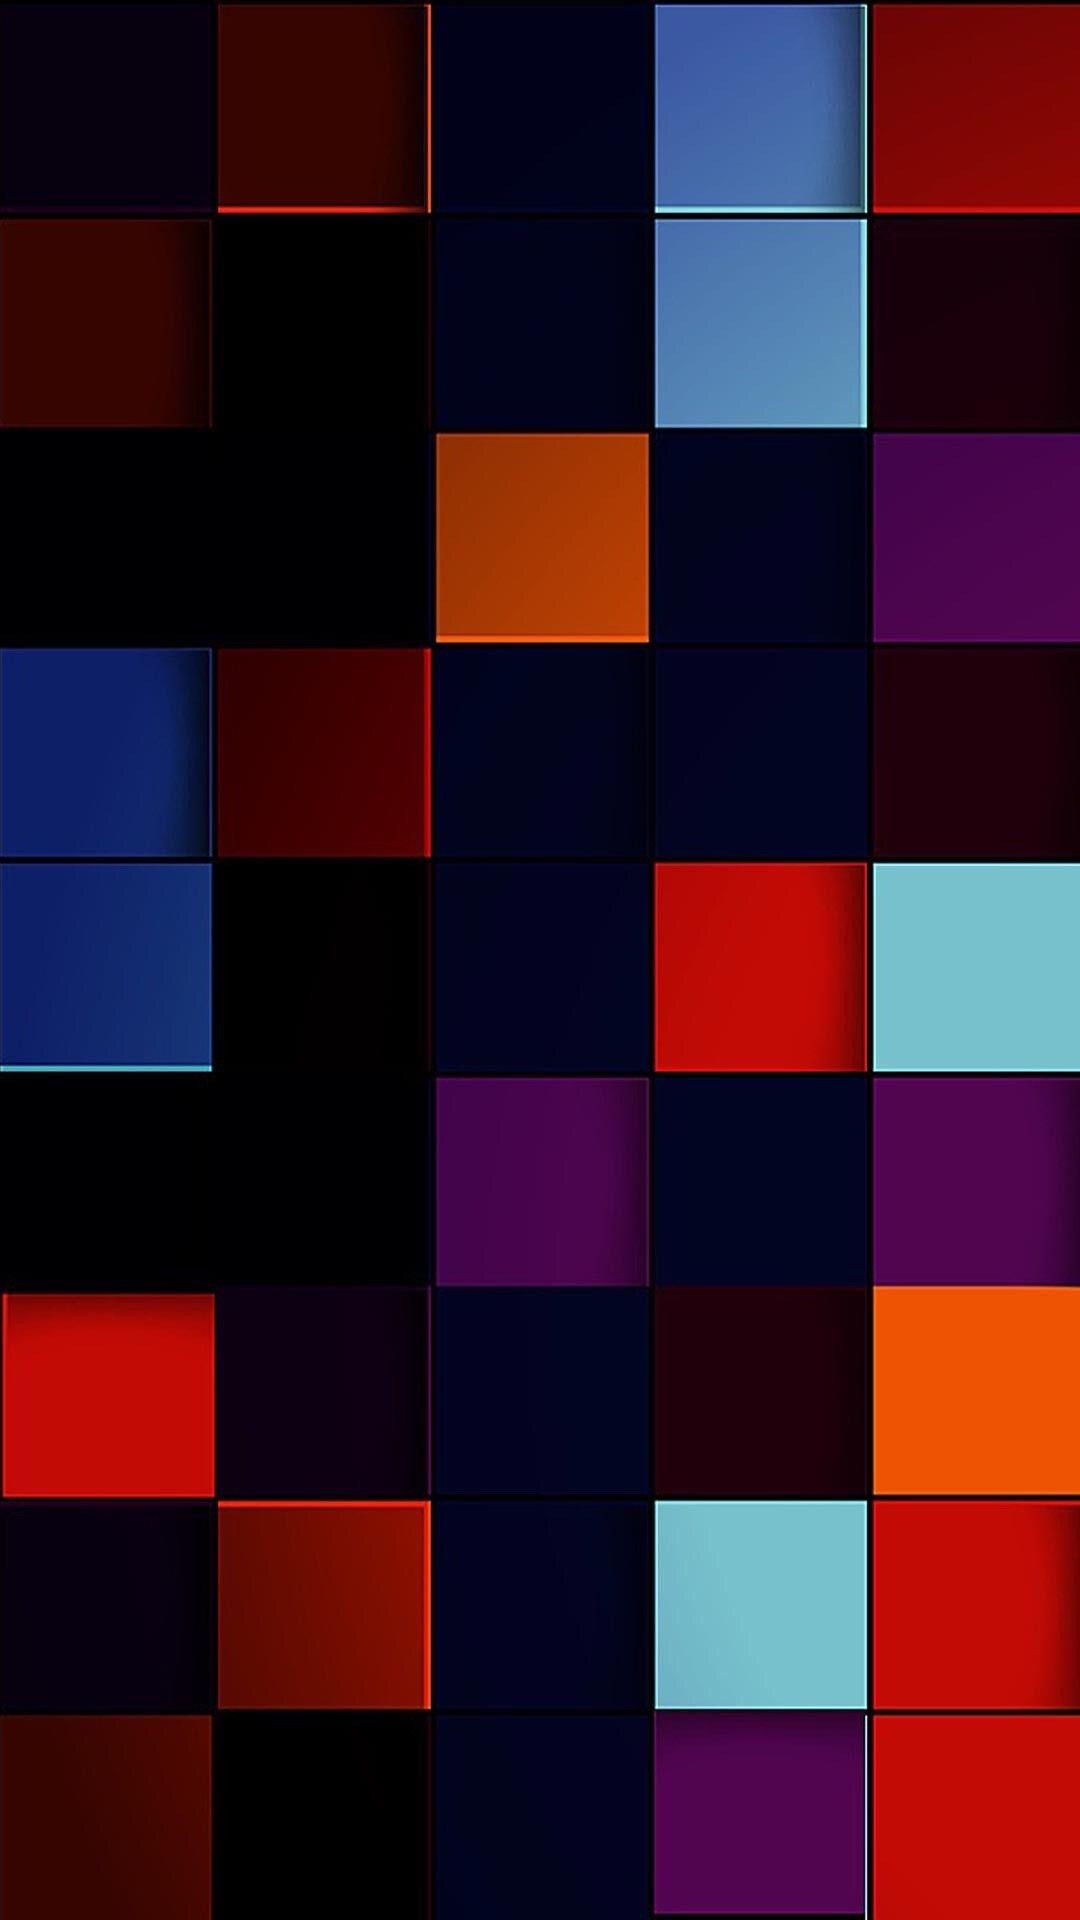 Colorful Geometric Shapes Wallpaper. Abstract iphone wallpaper, Geometric shapes wallpaper, Galaxy phone wallpaper